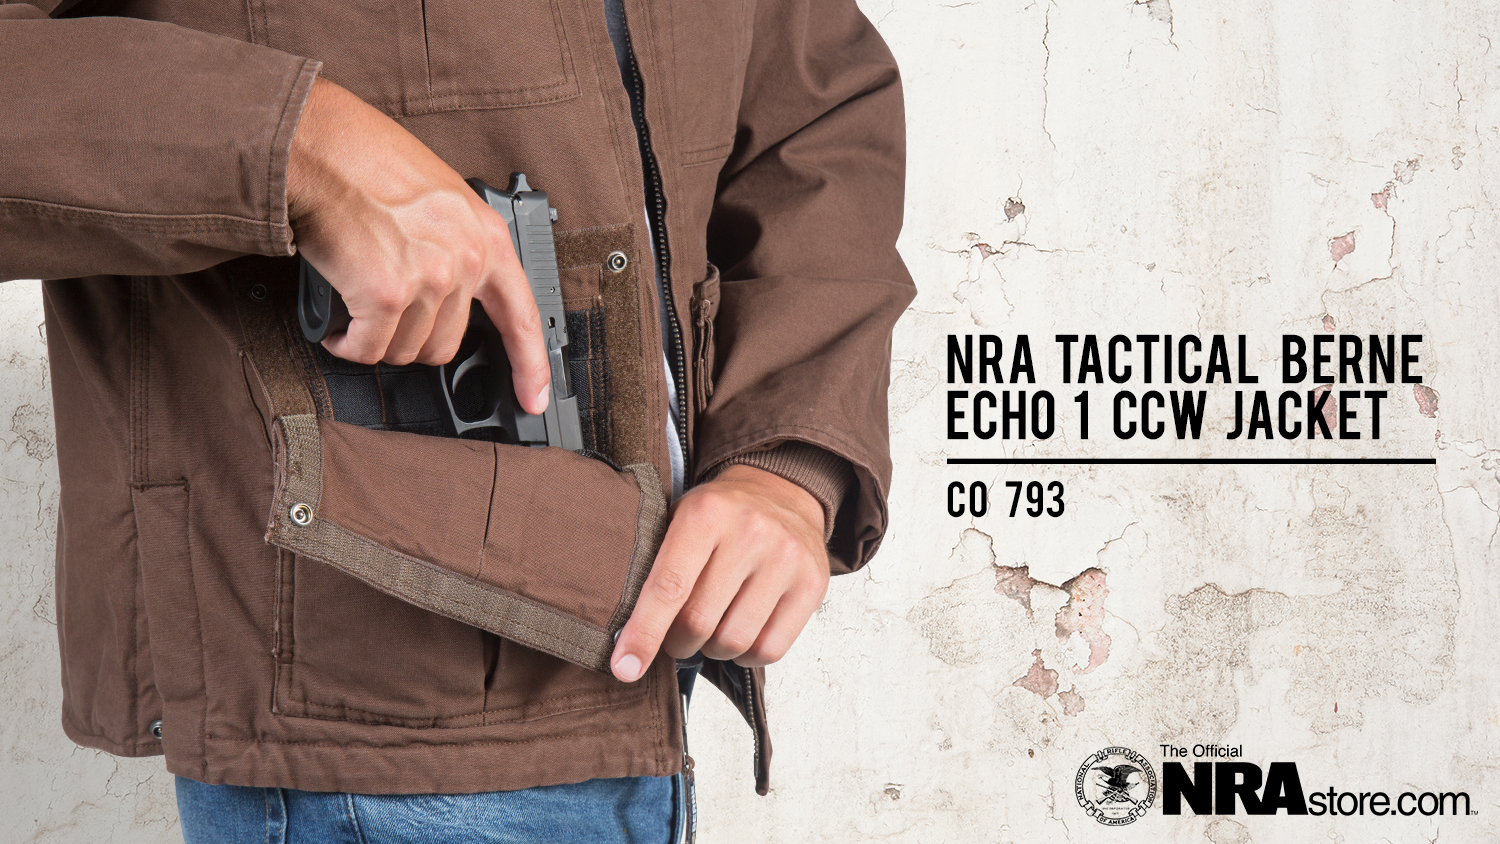 NRAstore Product Highlight: NRA Tactical Berne Echo 1 CCW Jacket